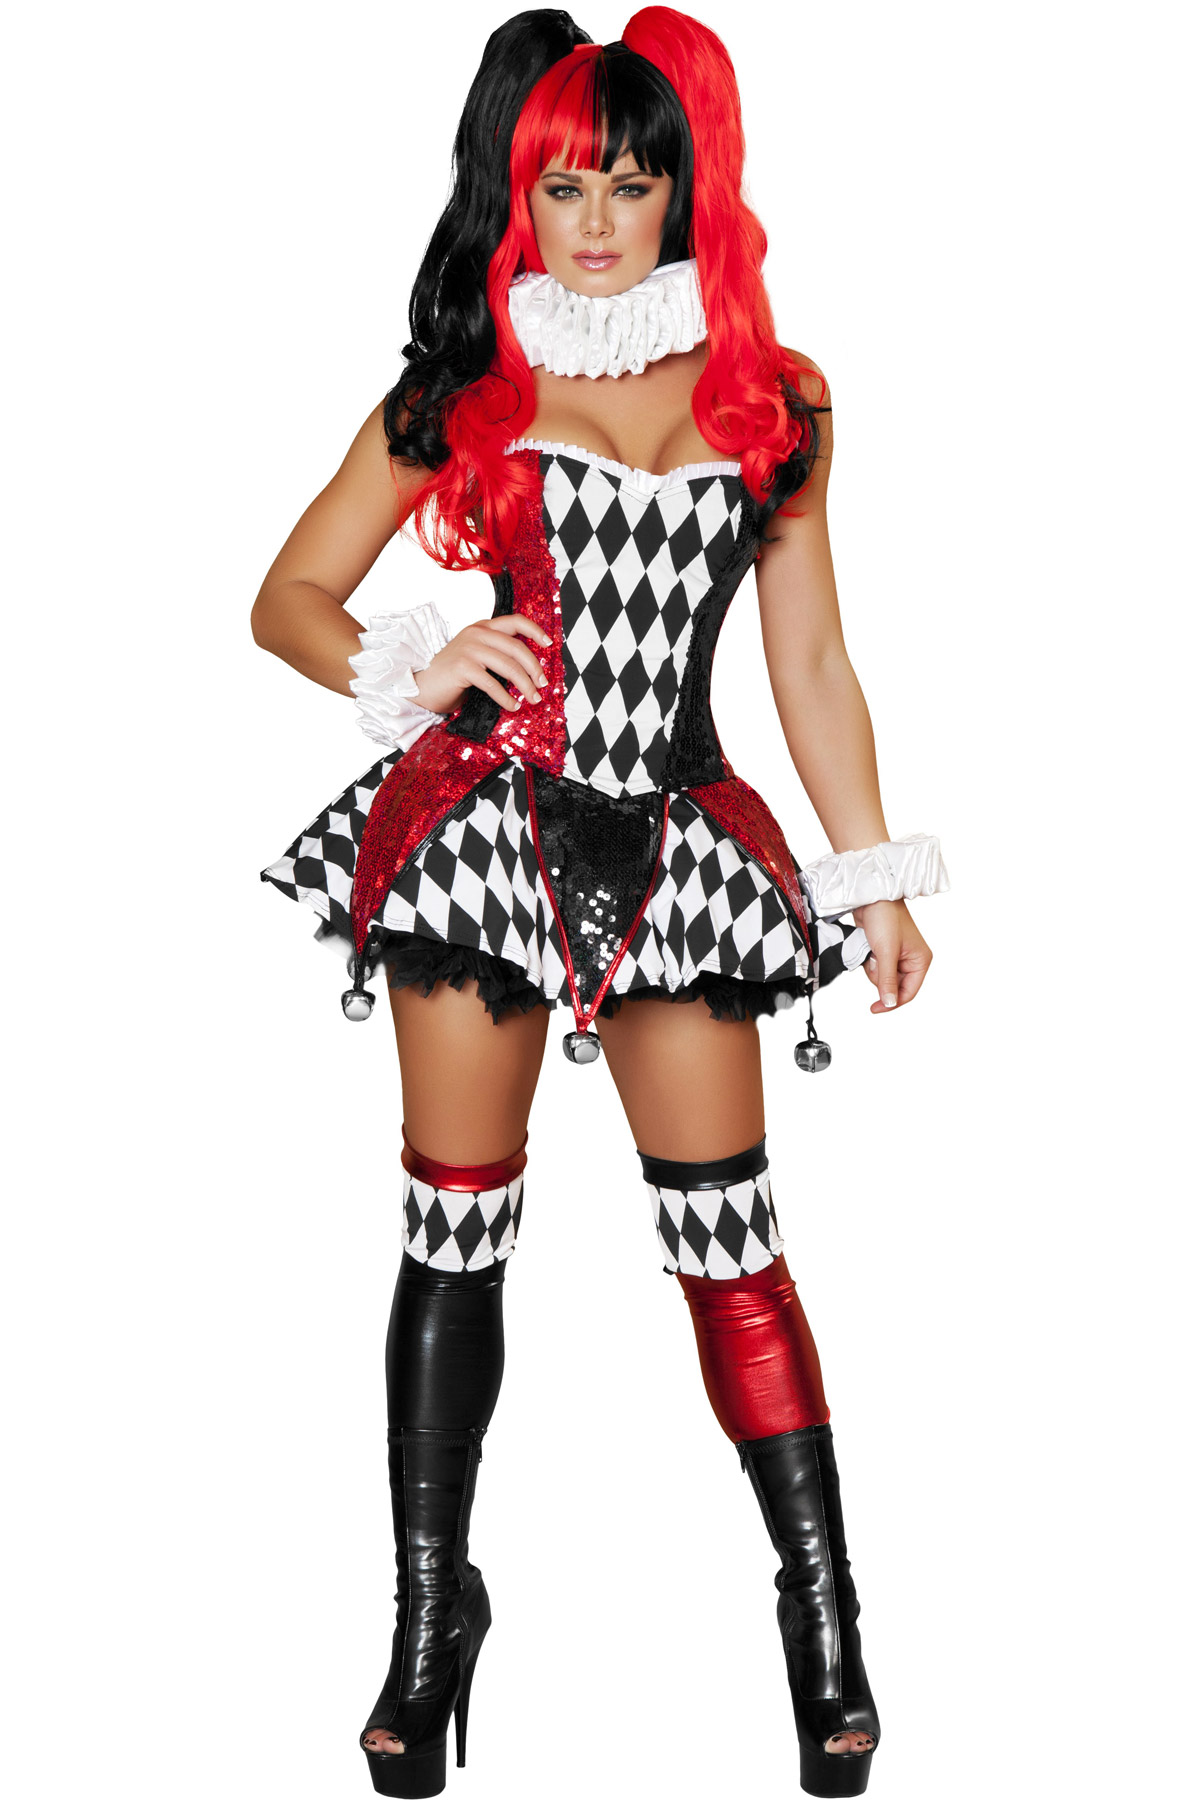 Sexy Adult Women Court Jester Cutie Clown Harlequin Costume Halloween Outfit New Ebay 6868